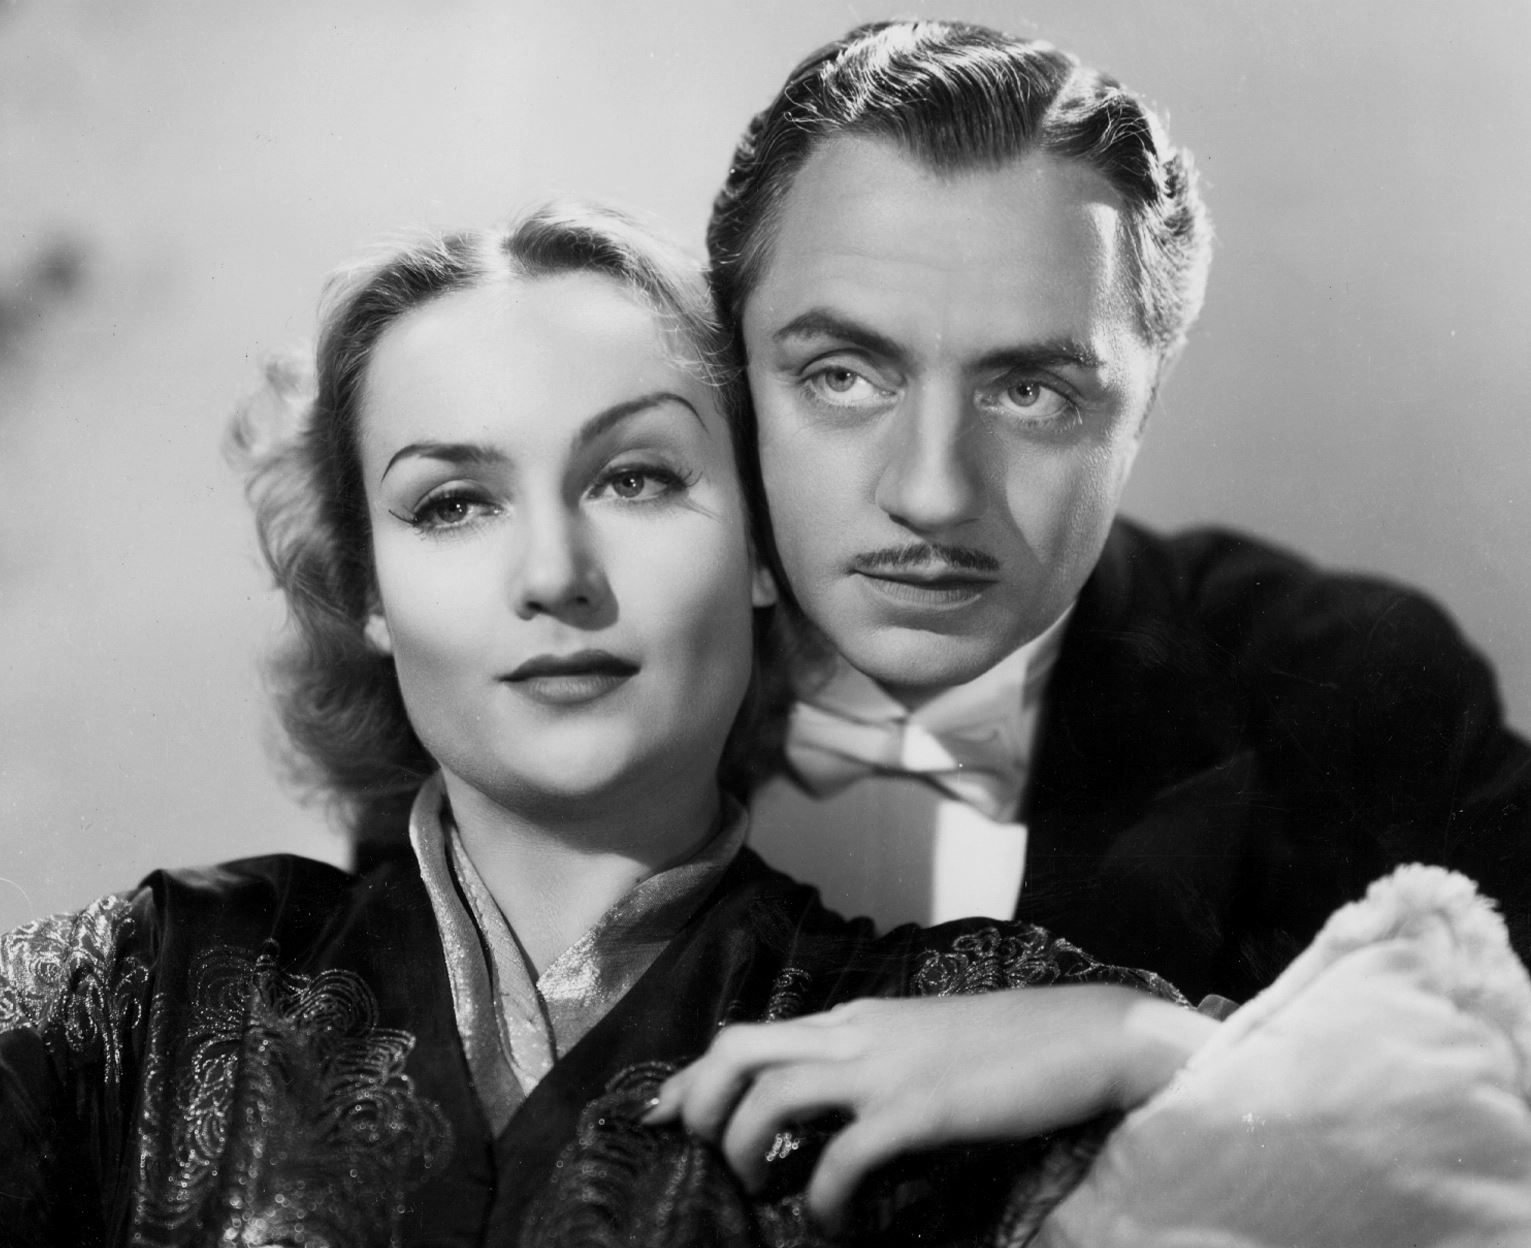 Image result for My man godfrey"